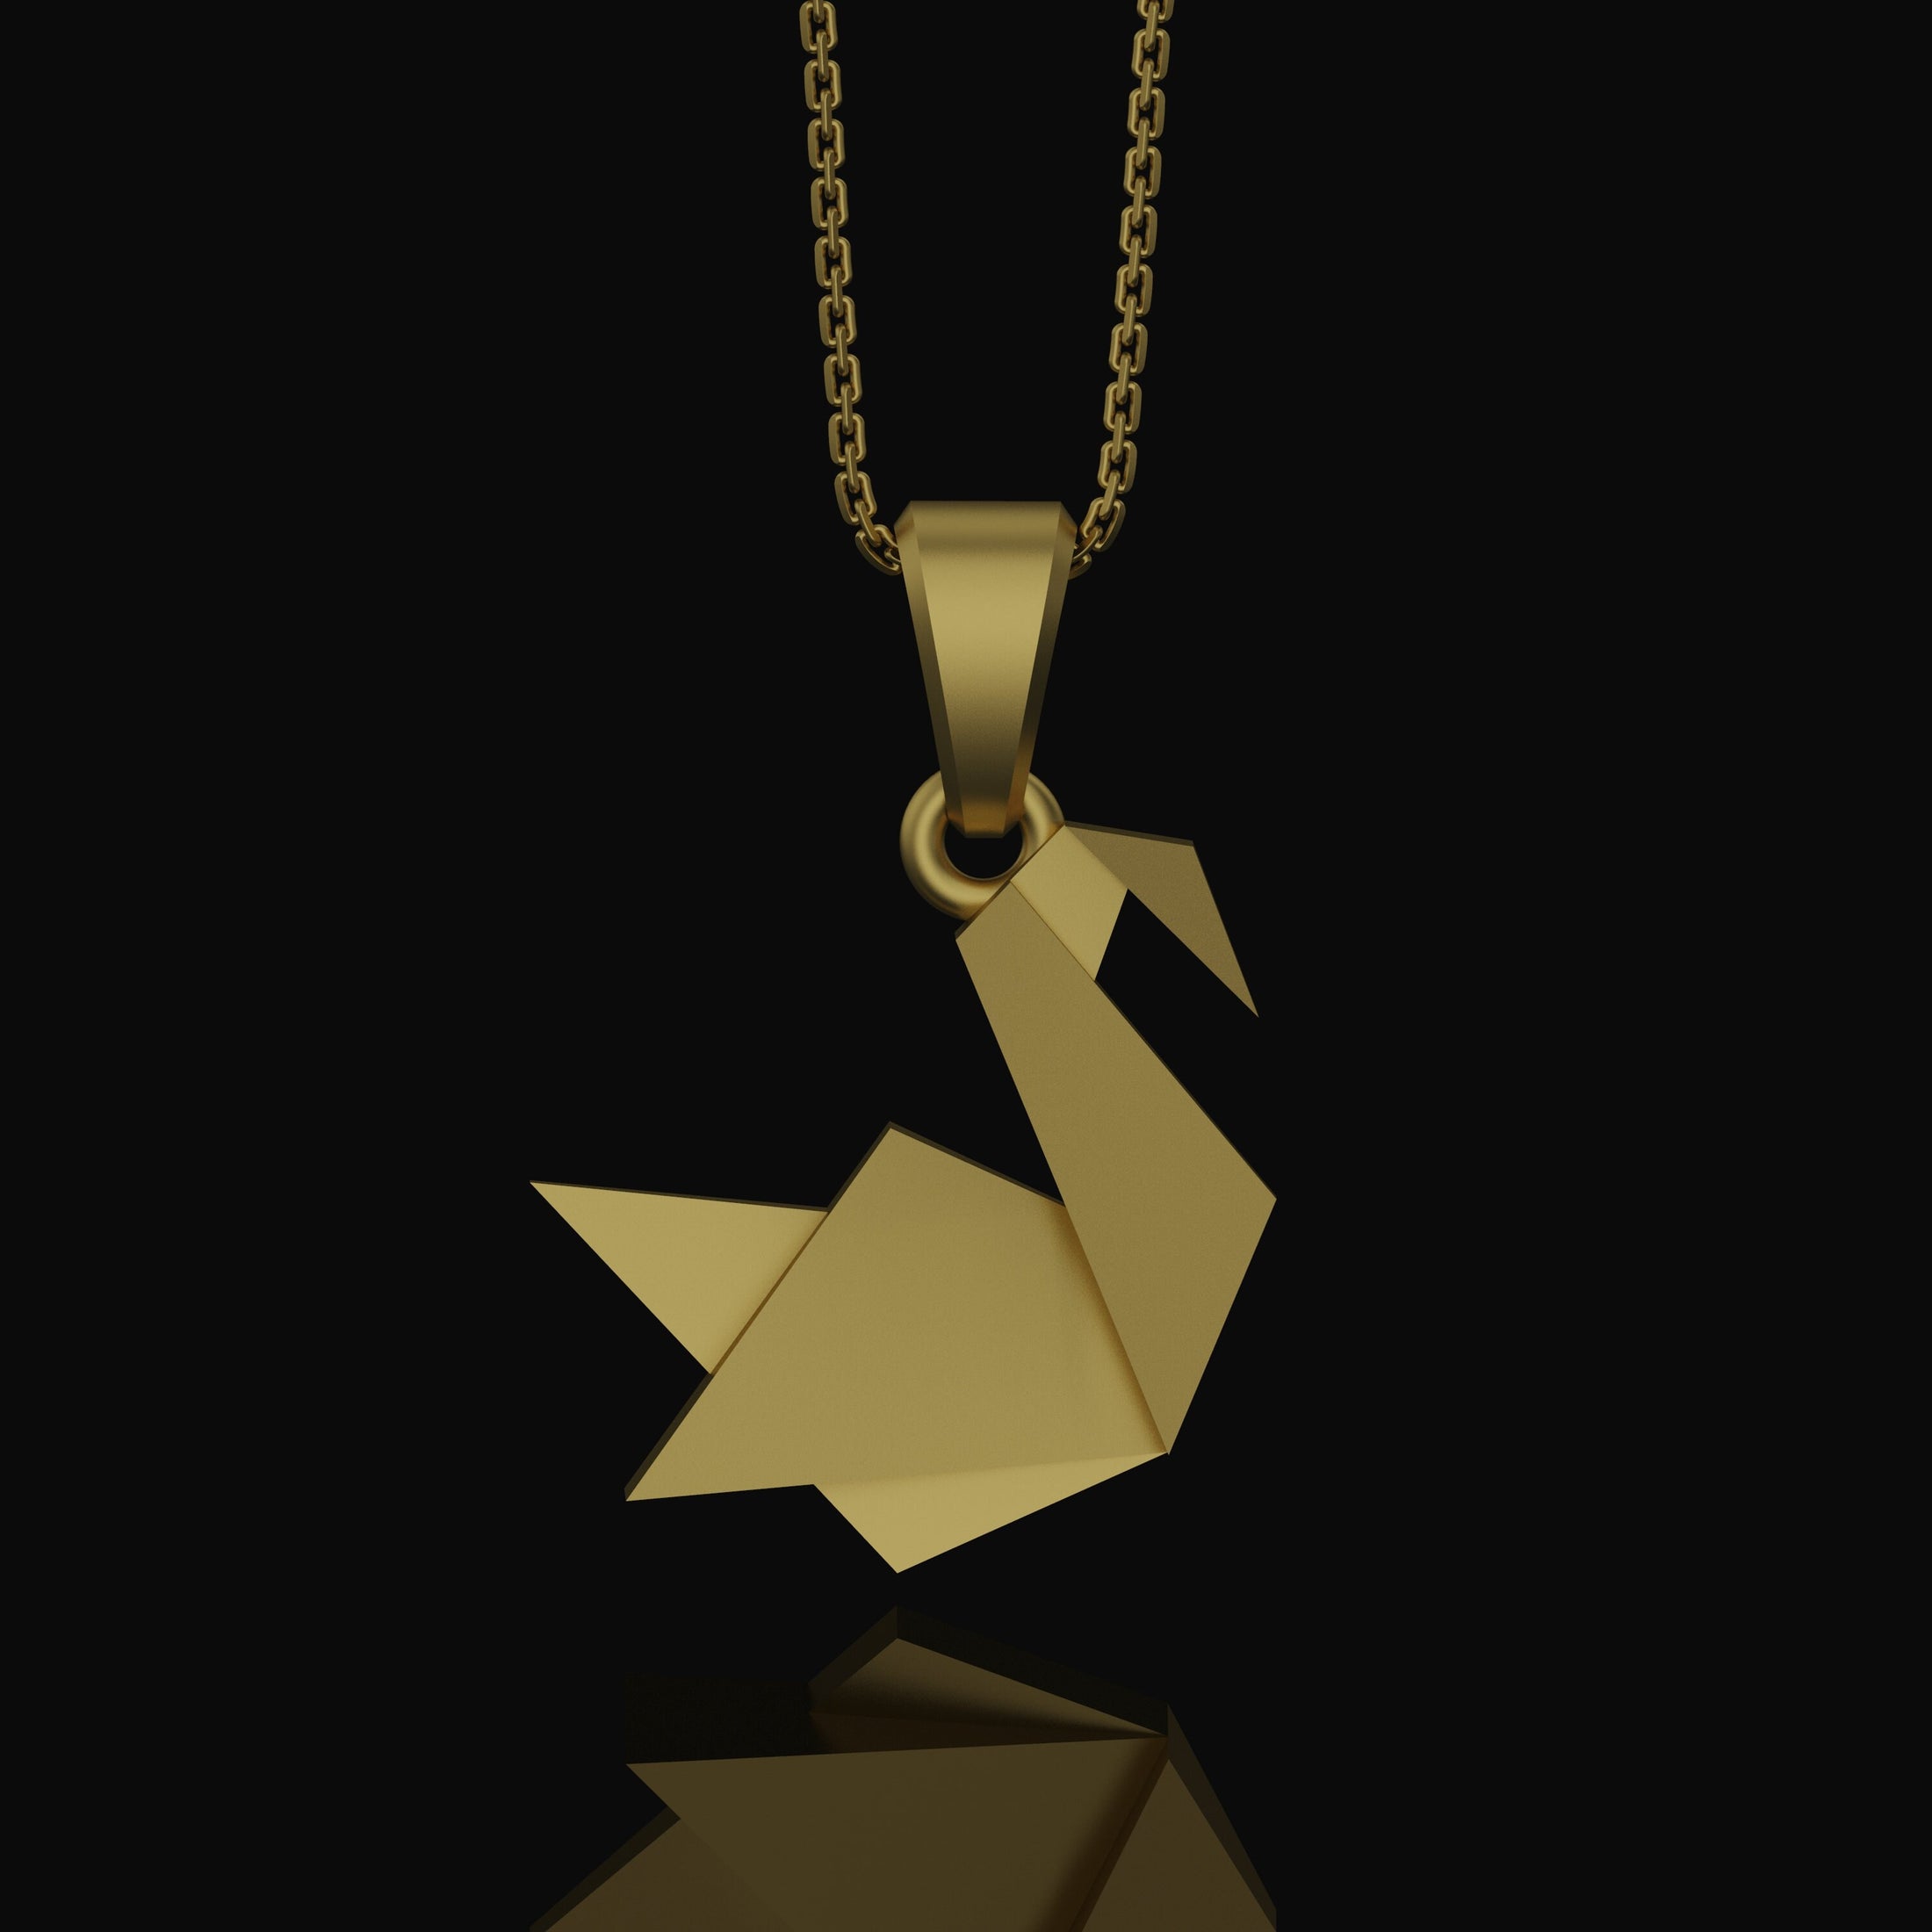 Silver Origami Swan Charm Necklace - Elegant Folded Swan Pendant, Chic and Artistic, Graceful Nature-Inspired Jewelry Gold Finish